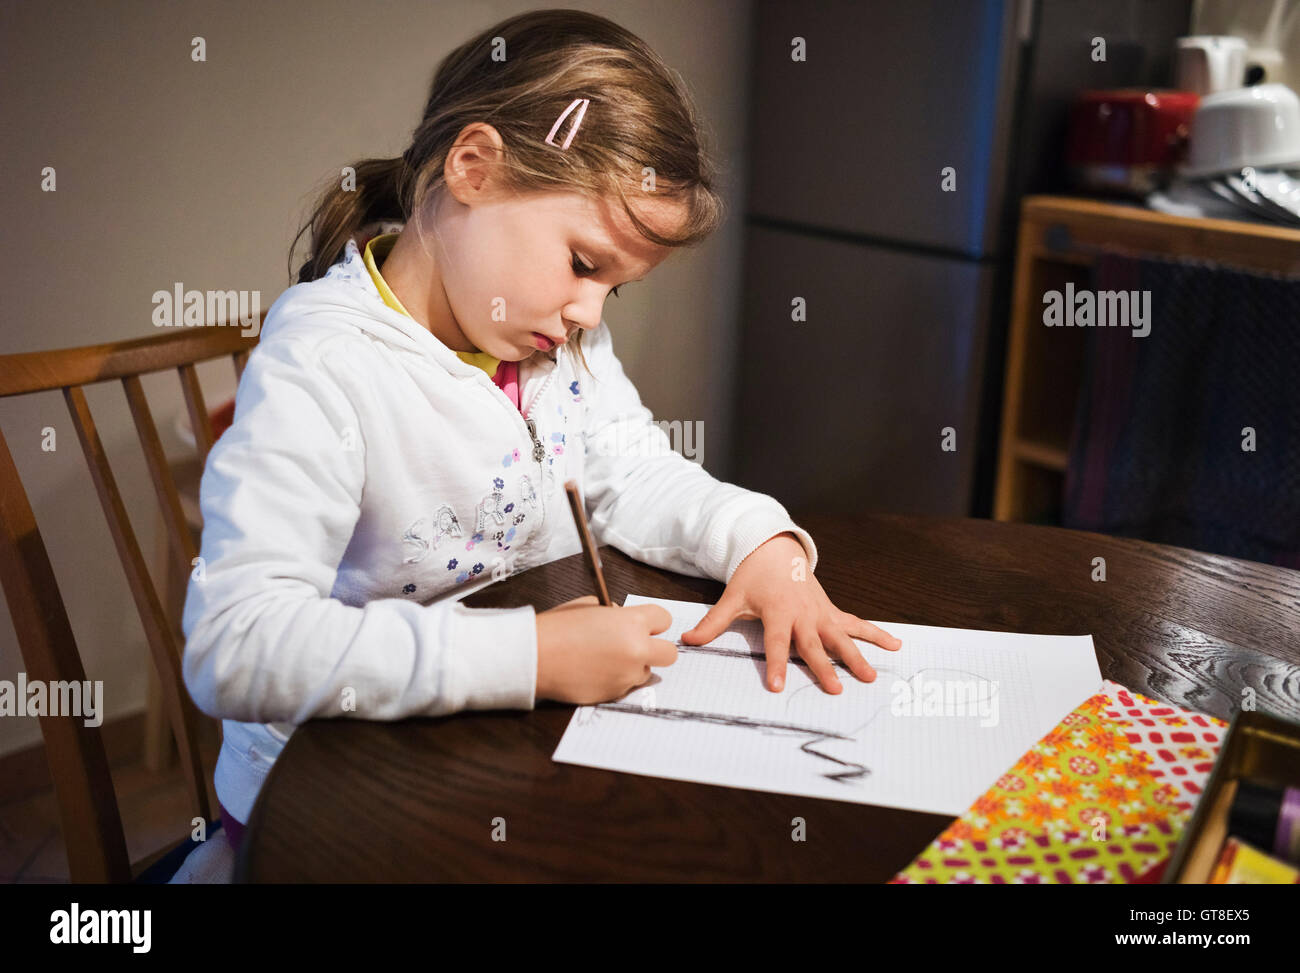 5 year old girl sitting at the table and drawing with a pencil, Germany Stock Photo